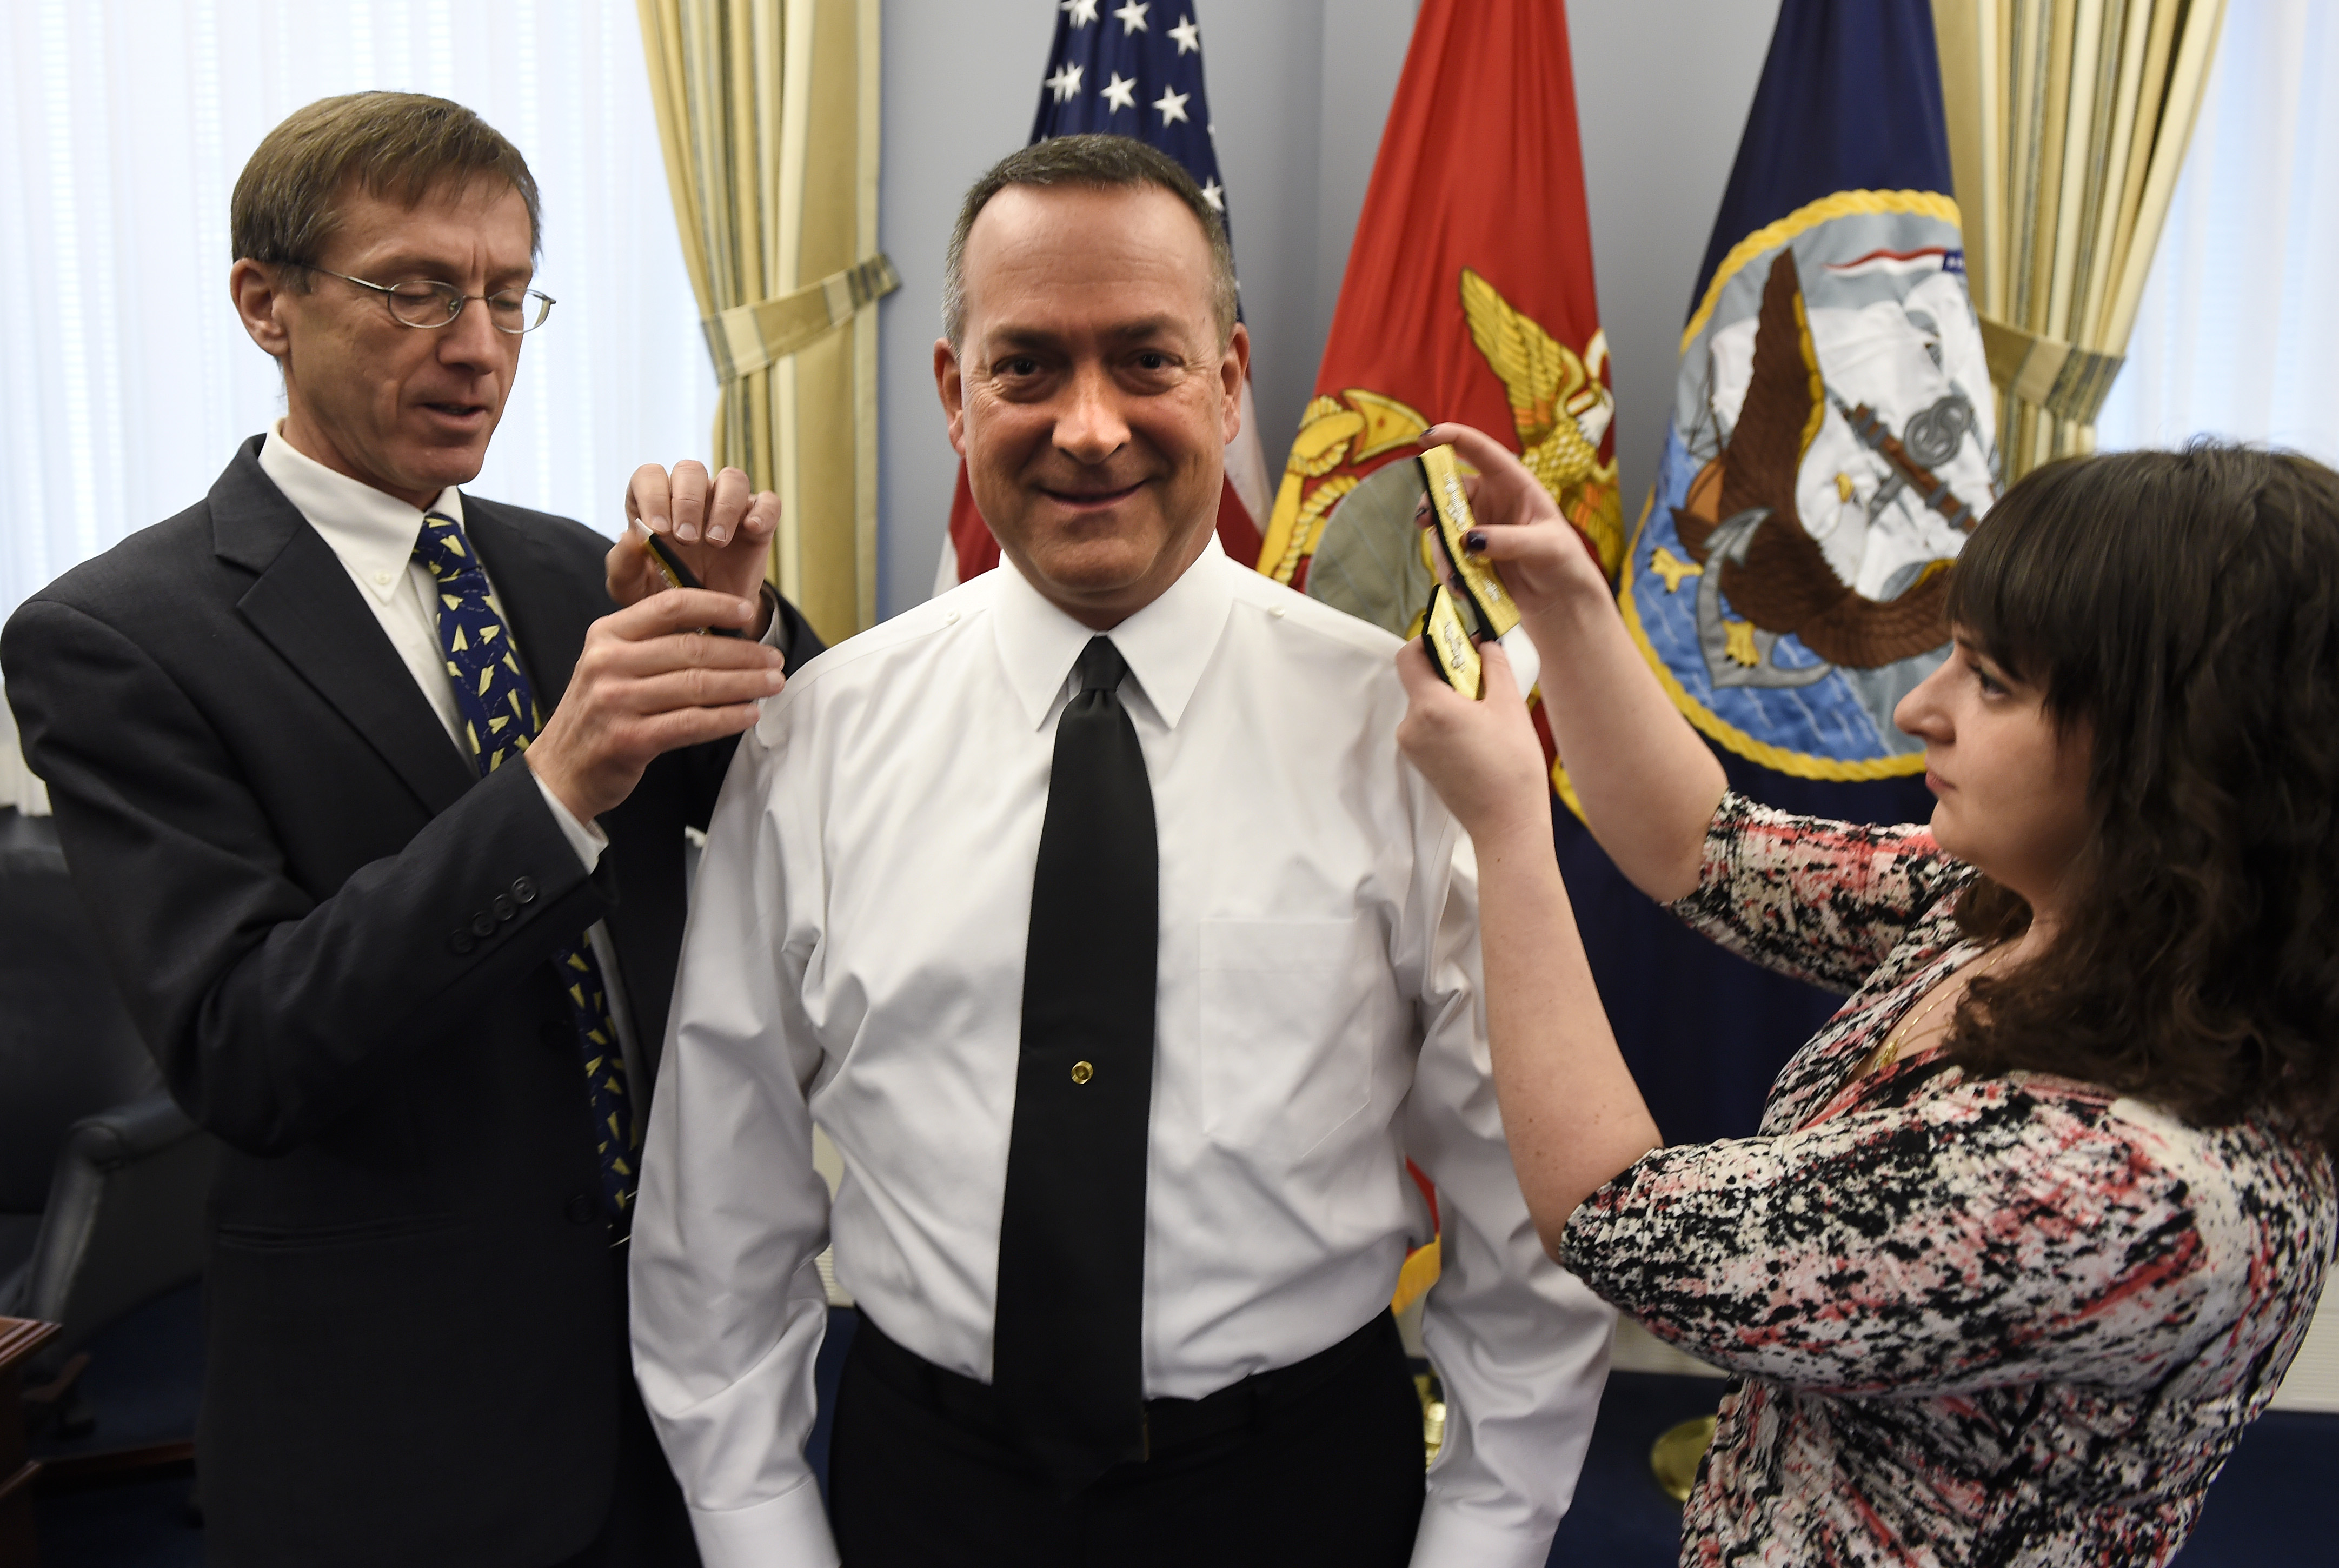 Sean J. Stackley, assistant secretary of the Navy for research development and acquisition, joins Rear Adm. Mathias Winter's daughter as they replace his one-star shoulder boards with two-star shoulder boards. US Navy Photo